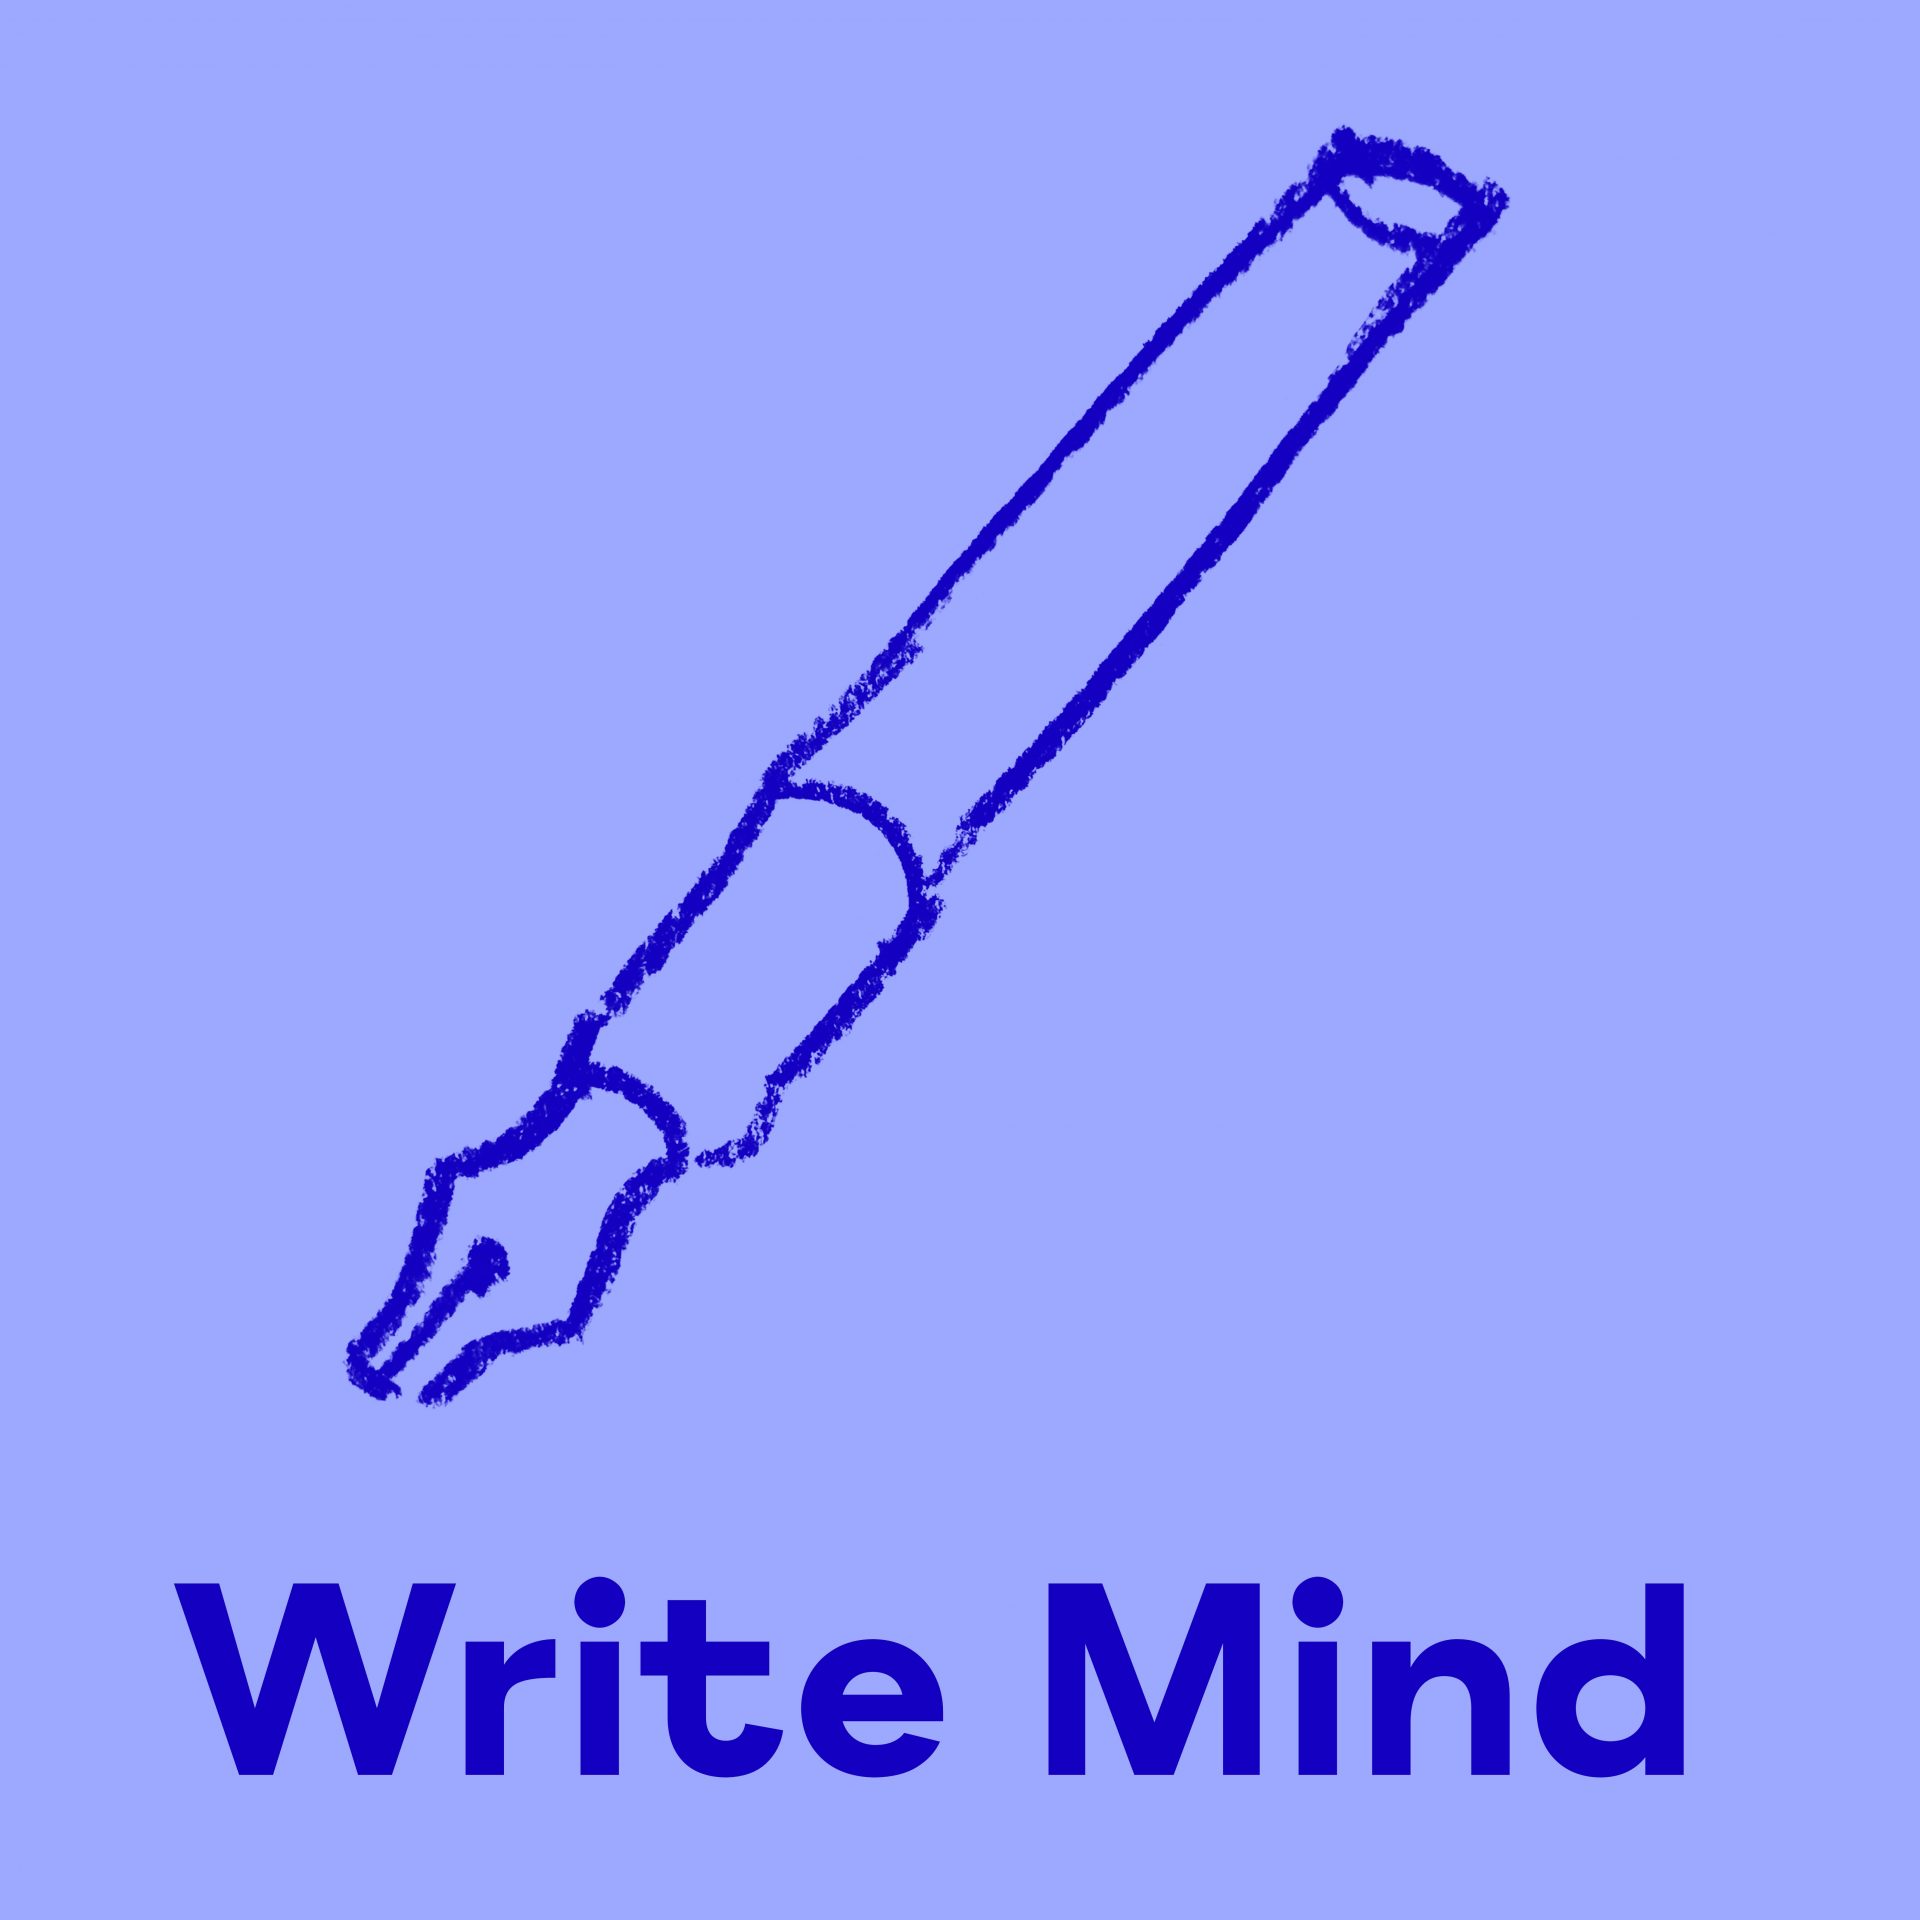 Submissions open for August edition of Write Mind